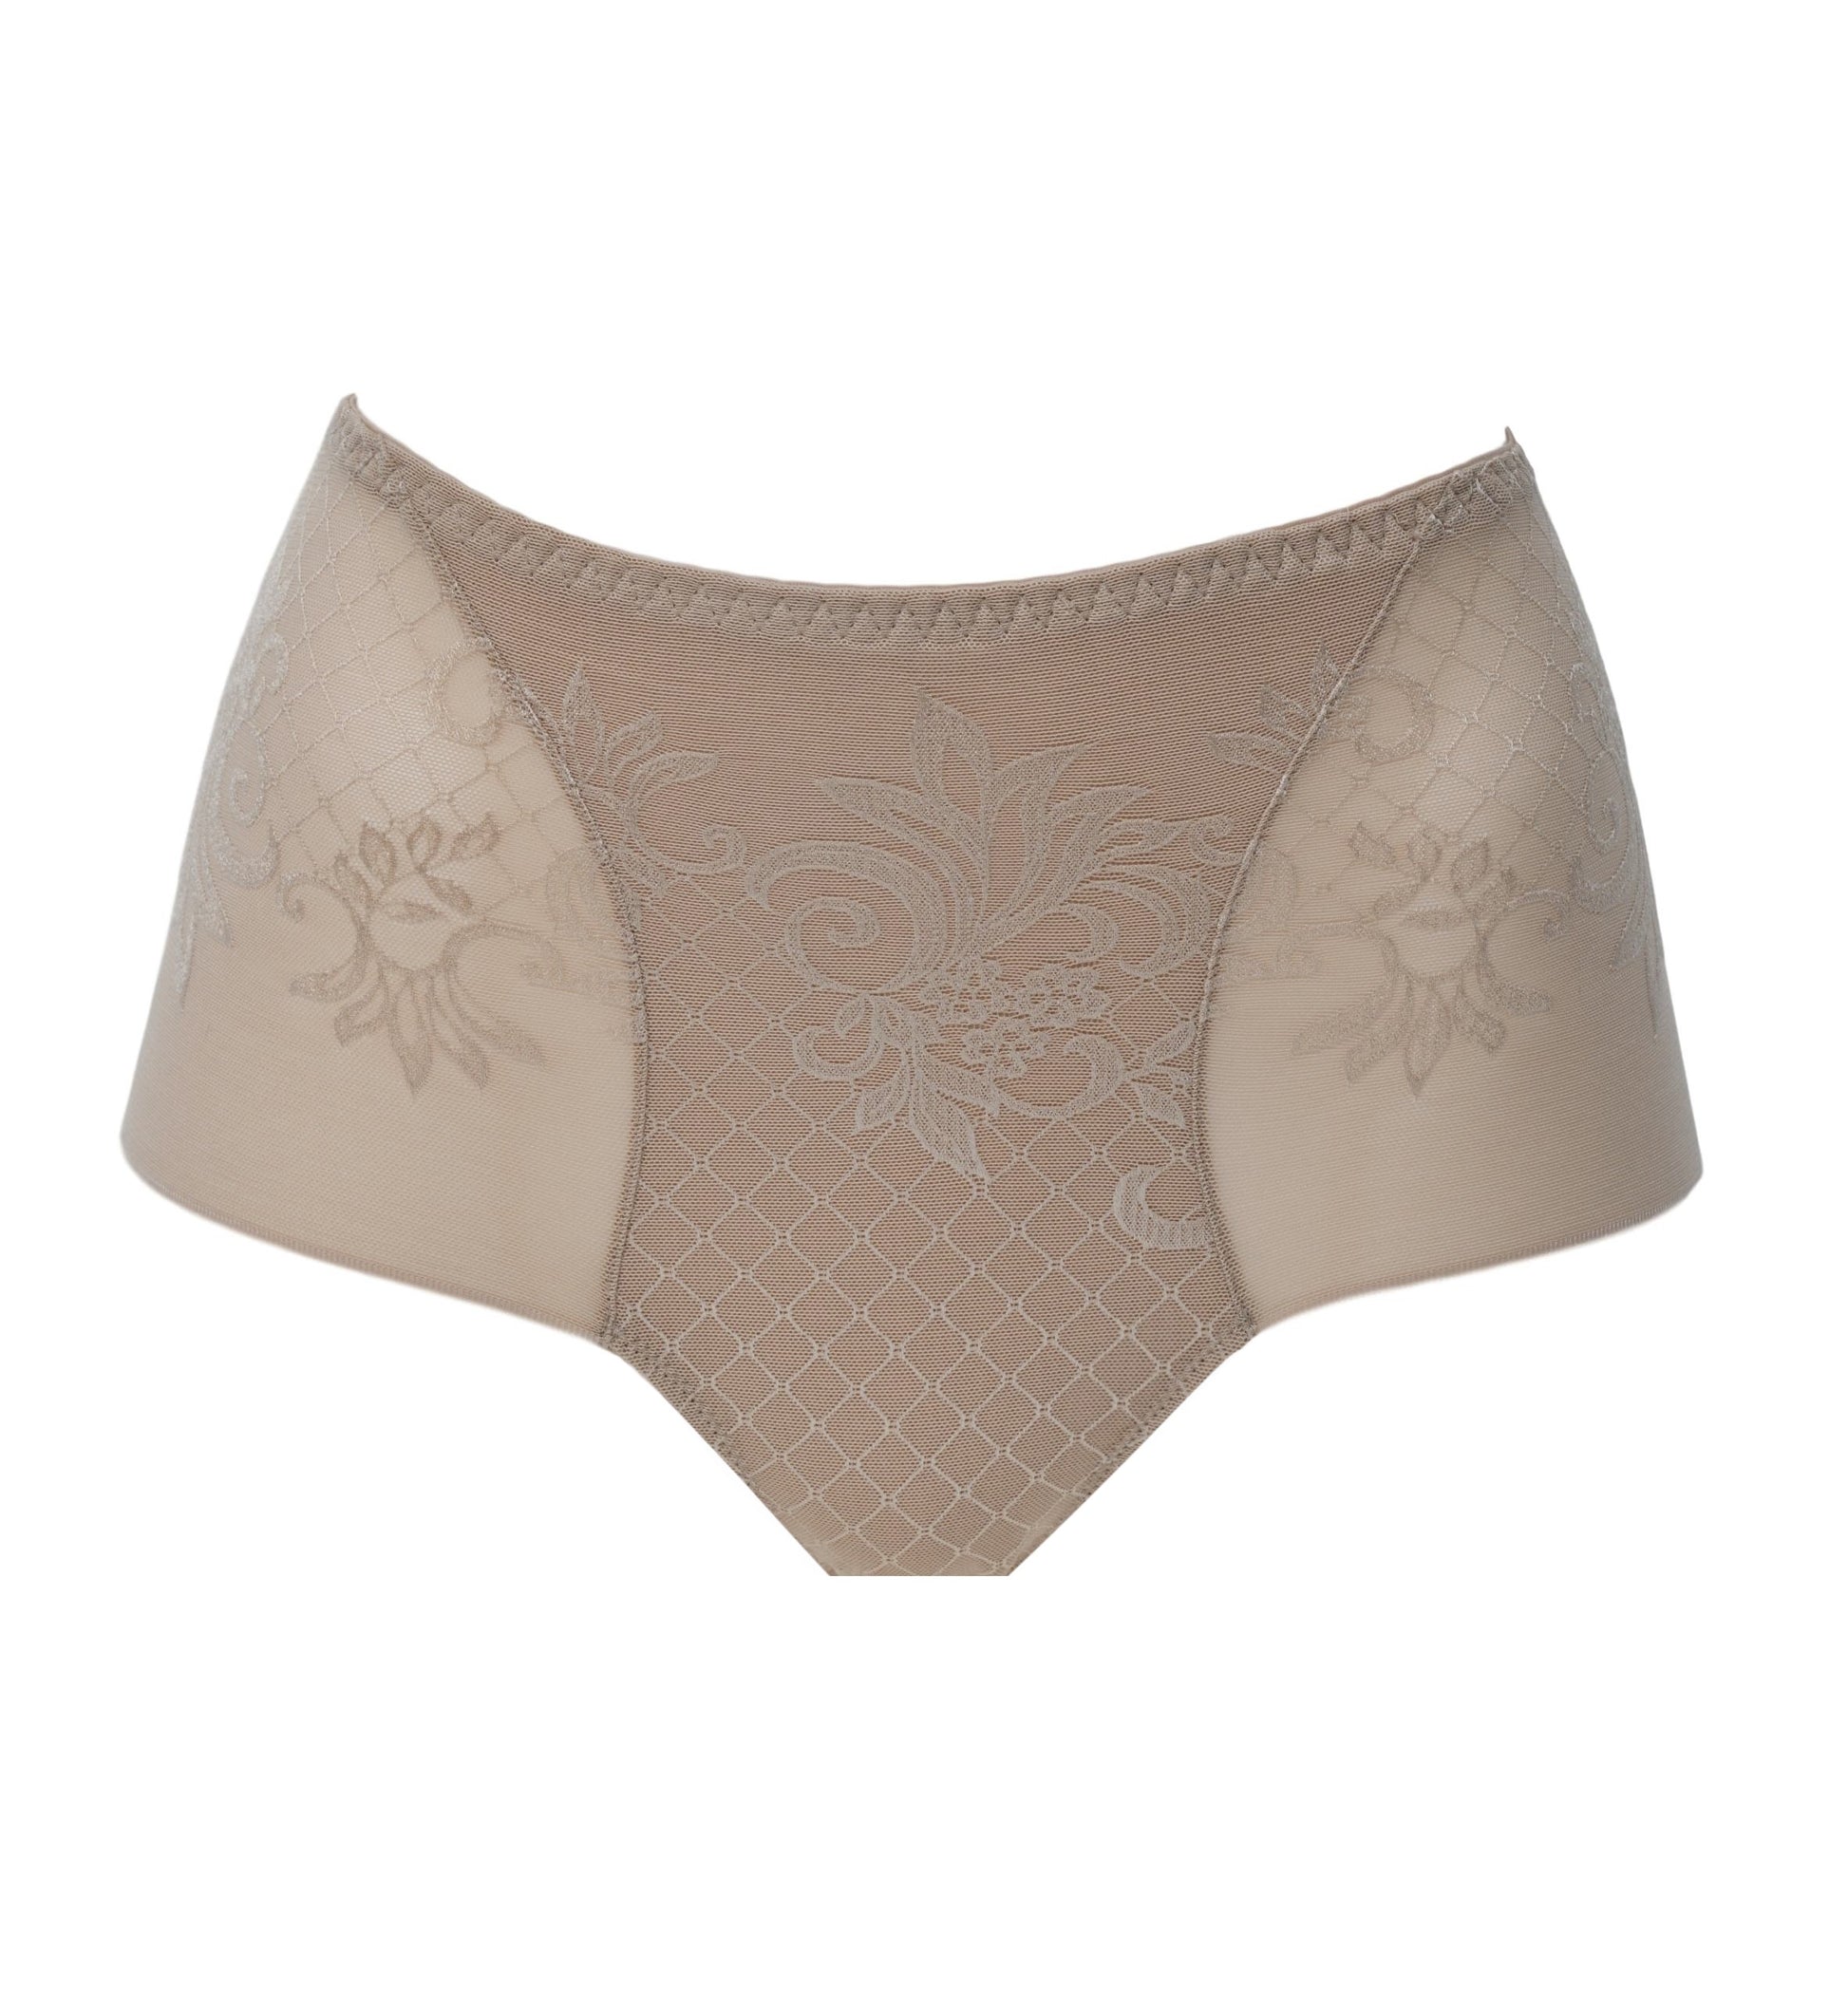 This full-brief from the Free line by Italian brand Leilieve is exquisitely crafted from a delicate semi-sheer jacquard fabric featuring a harmonious blend of floral and geometric patterns. The ultra-thin and soft fabric is highly stretchy and offers superior comfort, making it perfect for all day wear.